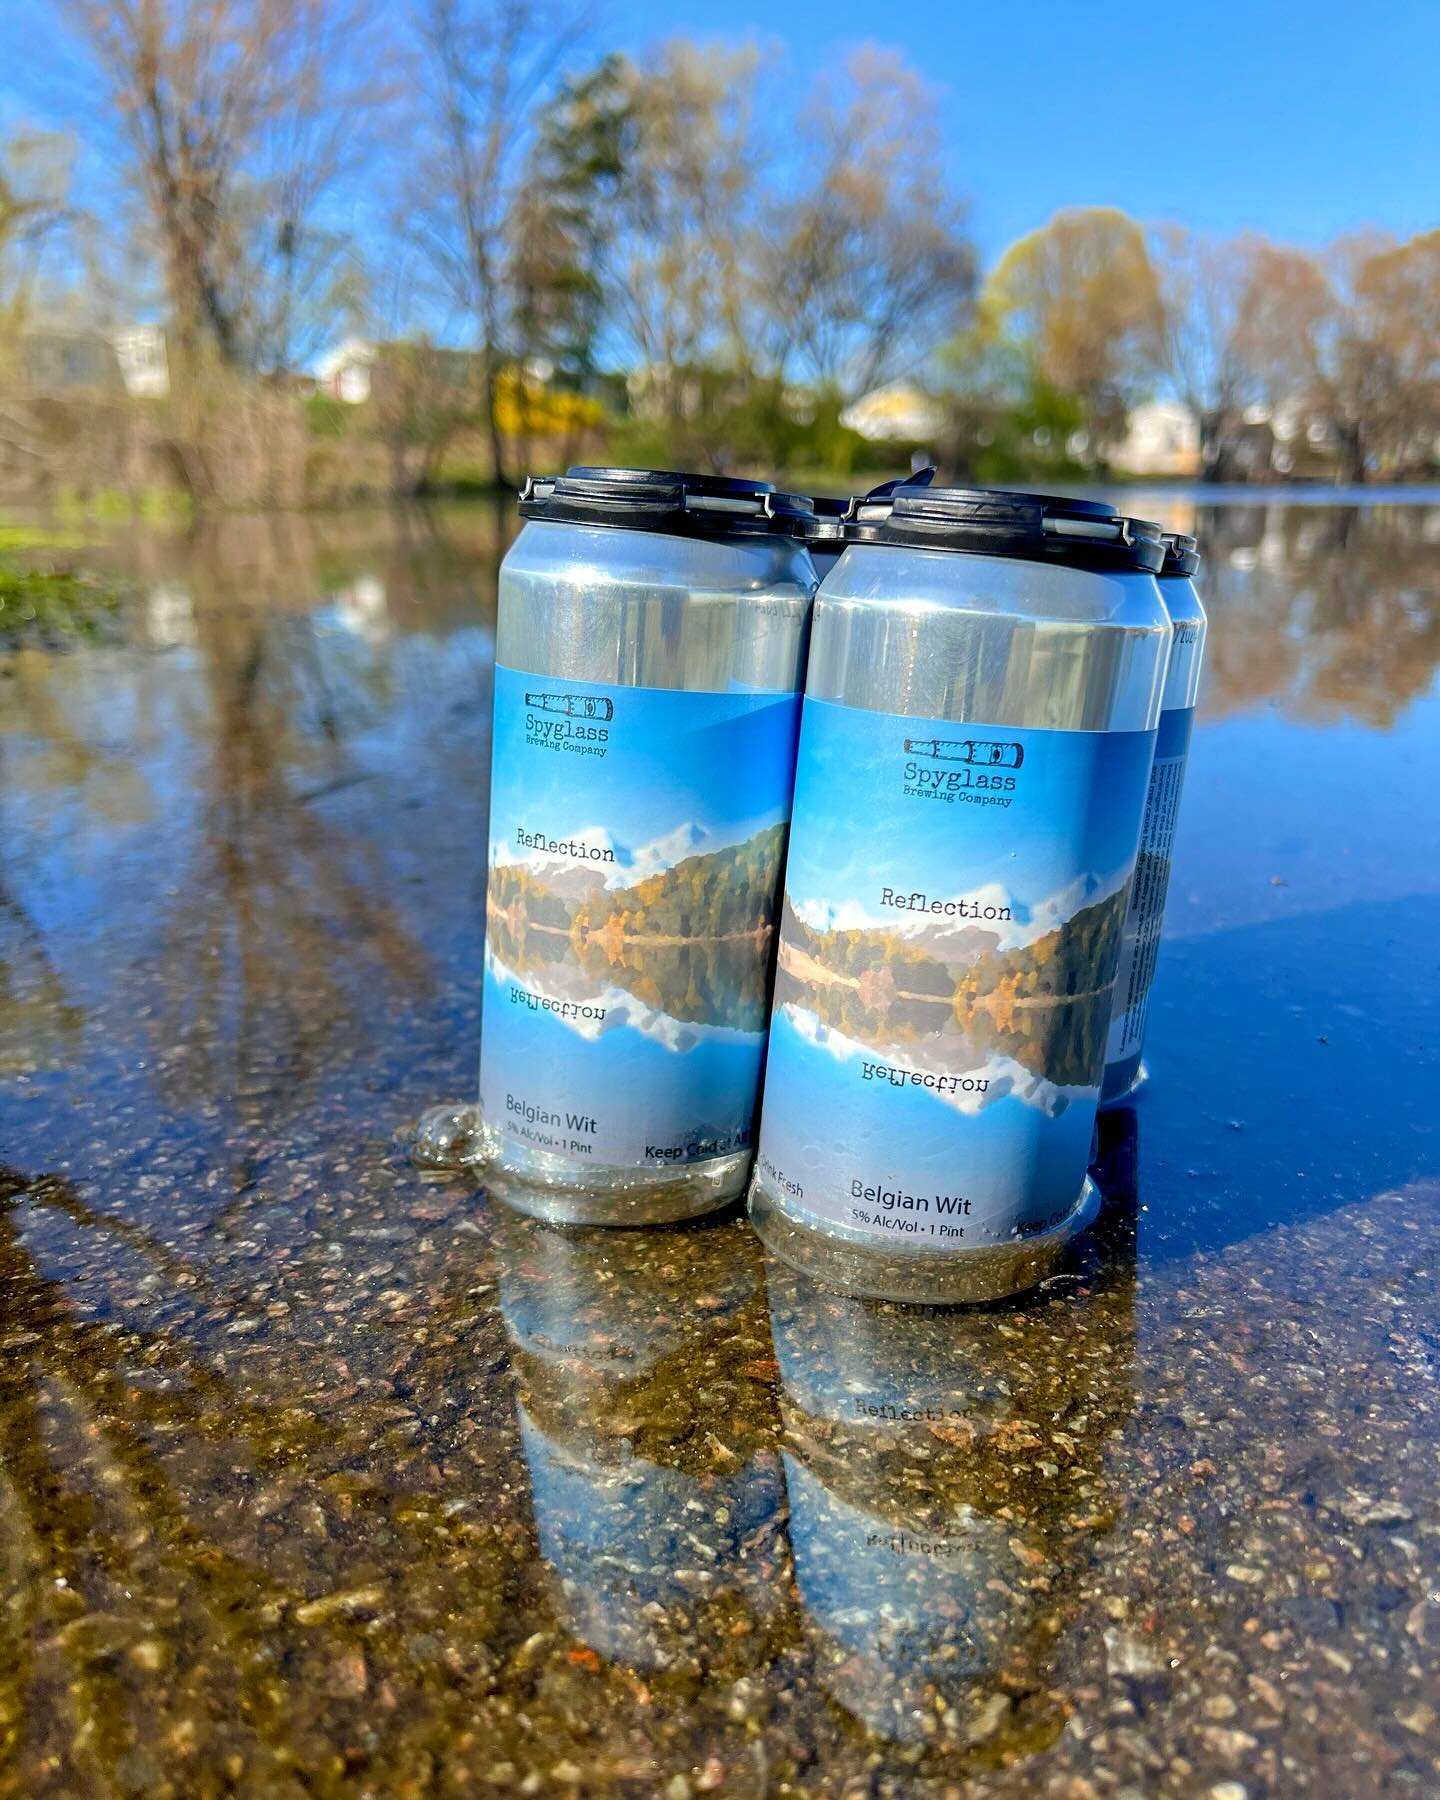 Reflect with some Reflection Belgian Wit

This is a refreshing 5% ABV Belgian Wit brewed with wheat malt, wheat flakes, coriander seeds, fresh orange zest and hopped with Saaz. This is the quintessential spring beer. 

Aroma of coriander and Belgian 